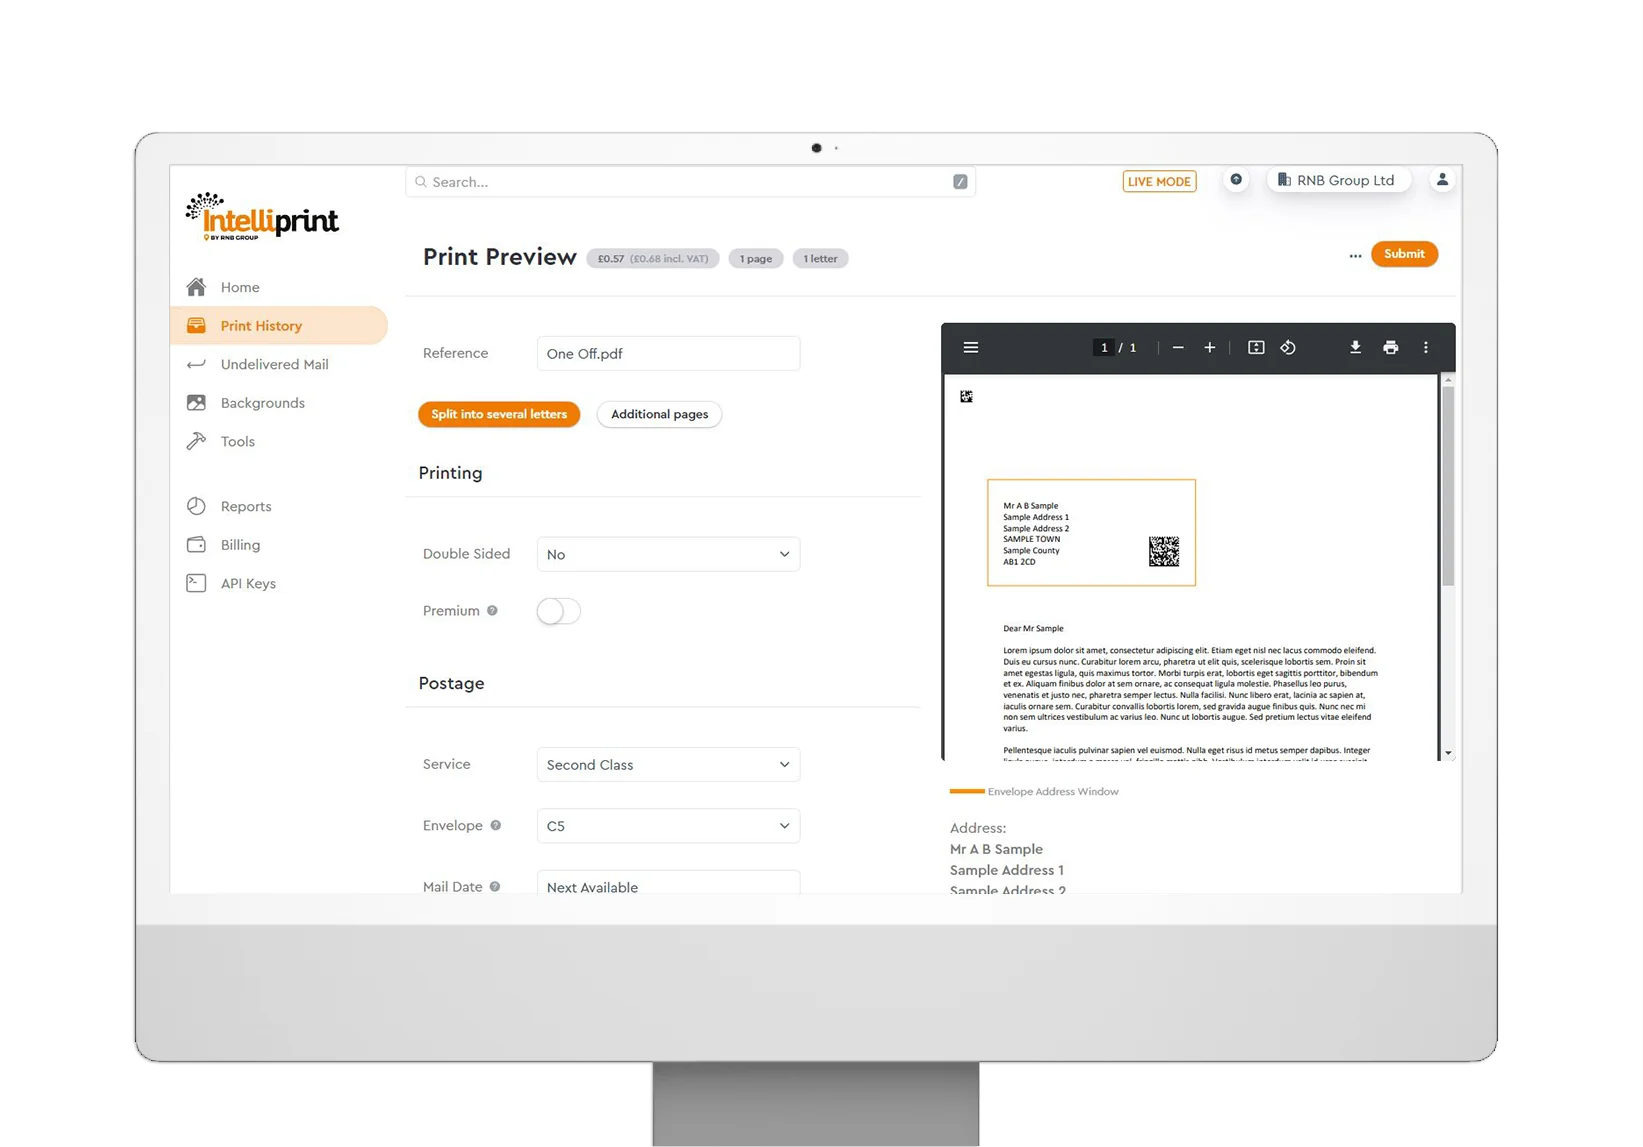 Intelliprint's interface showcasing online postage features